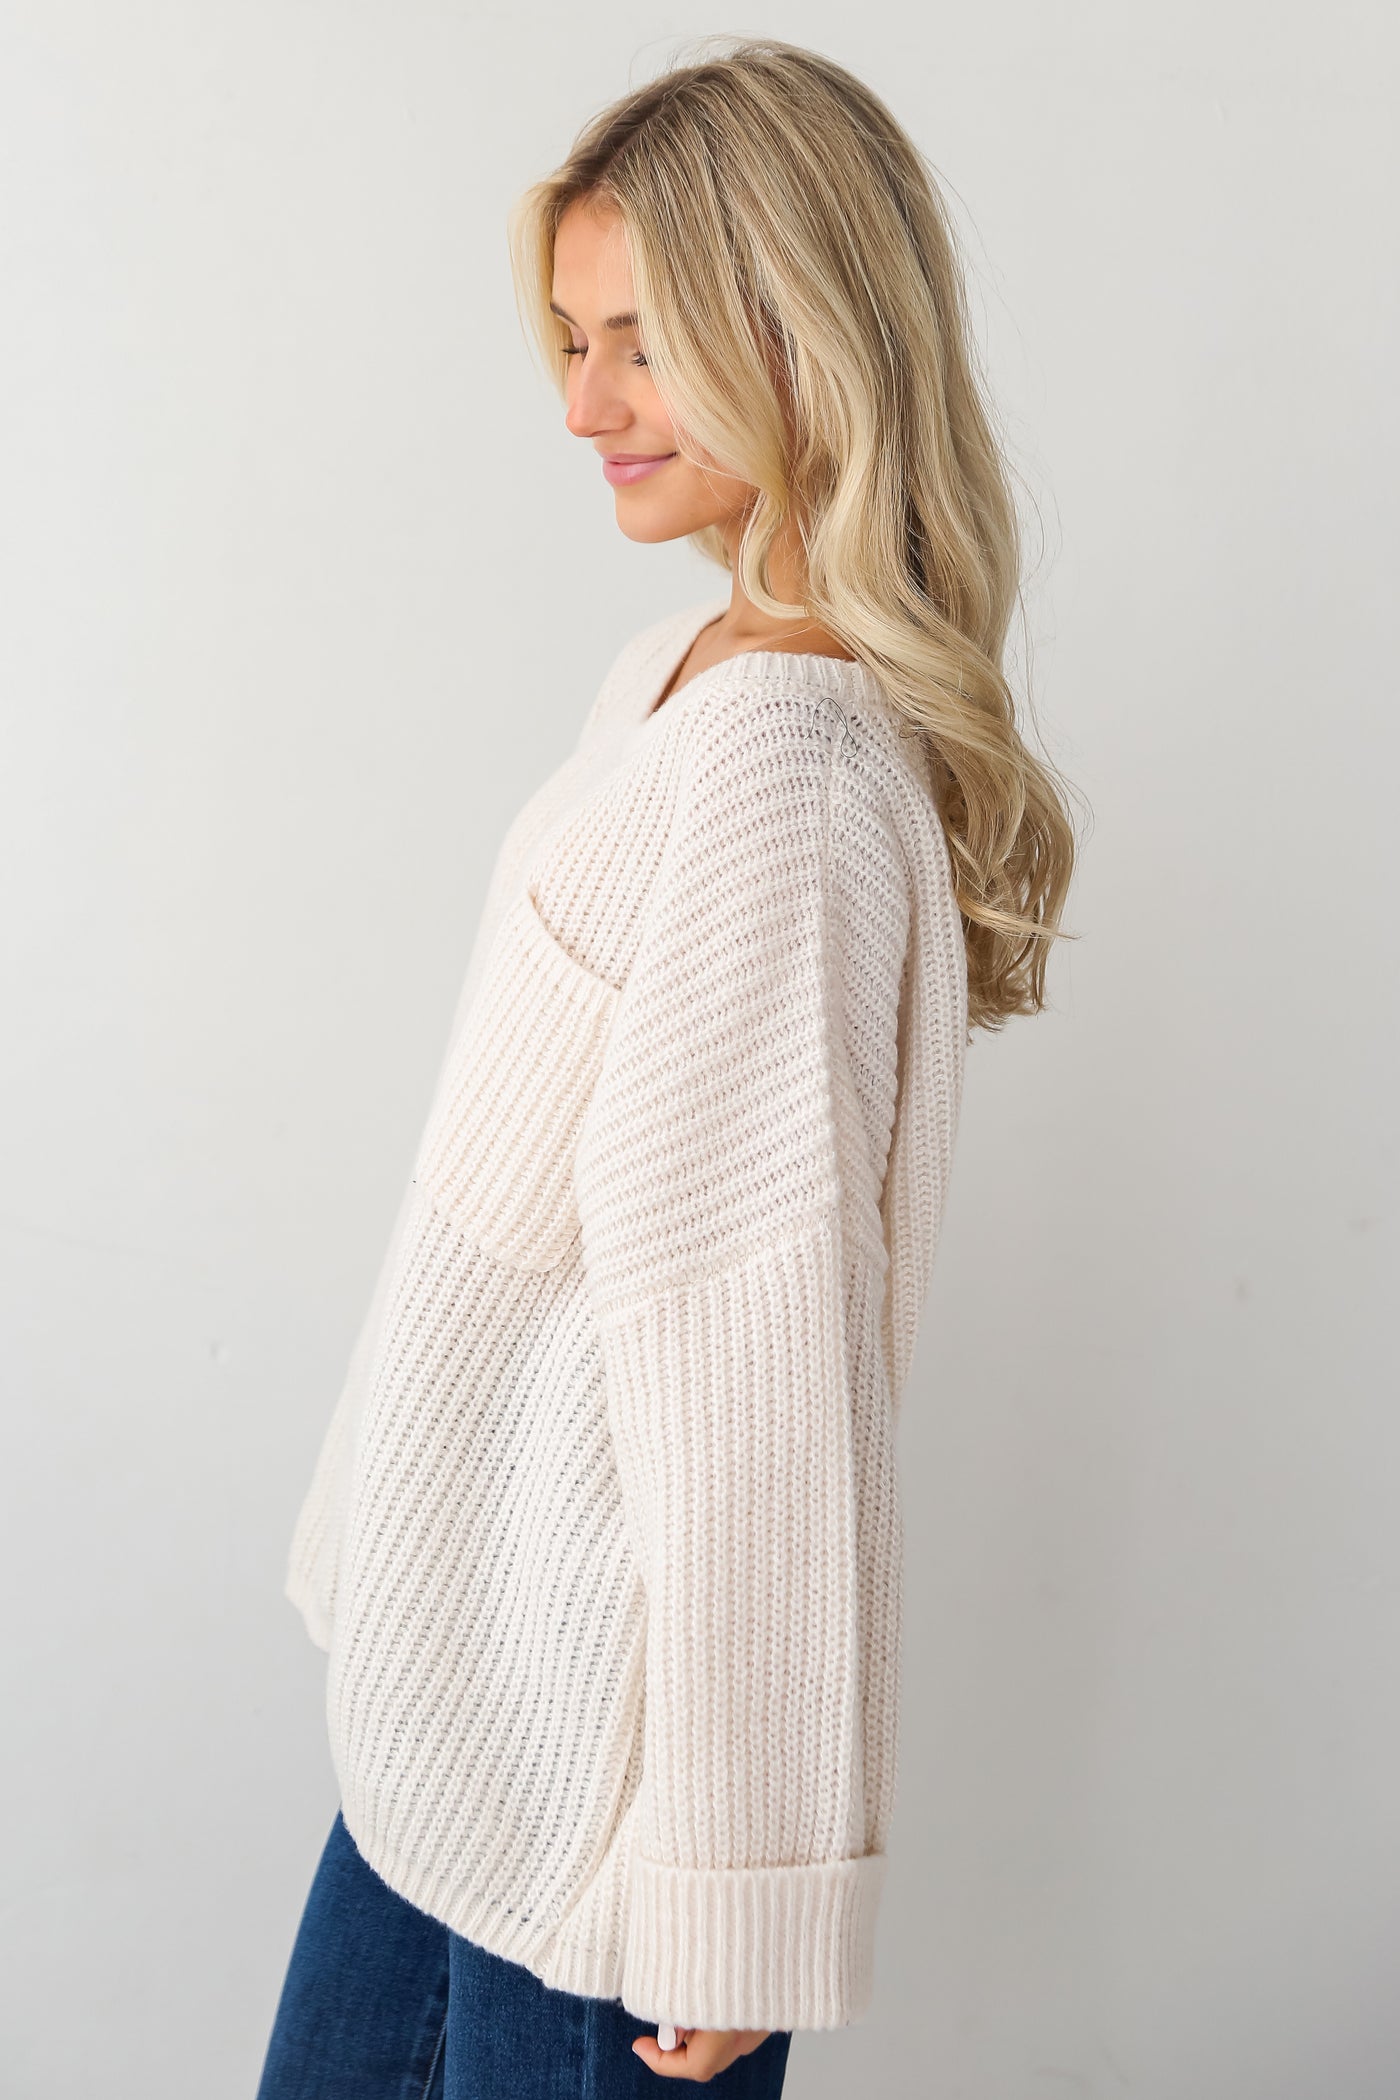 cream Oversized Sweater side view